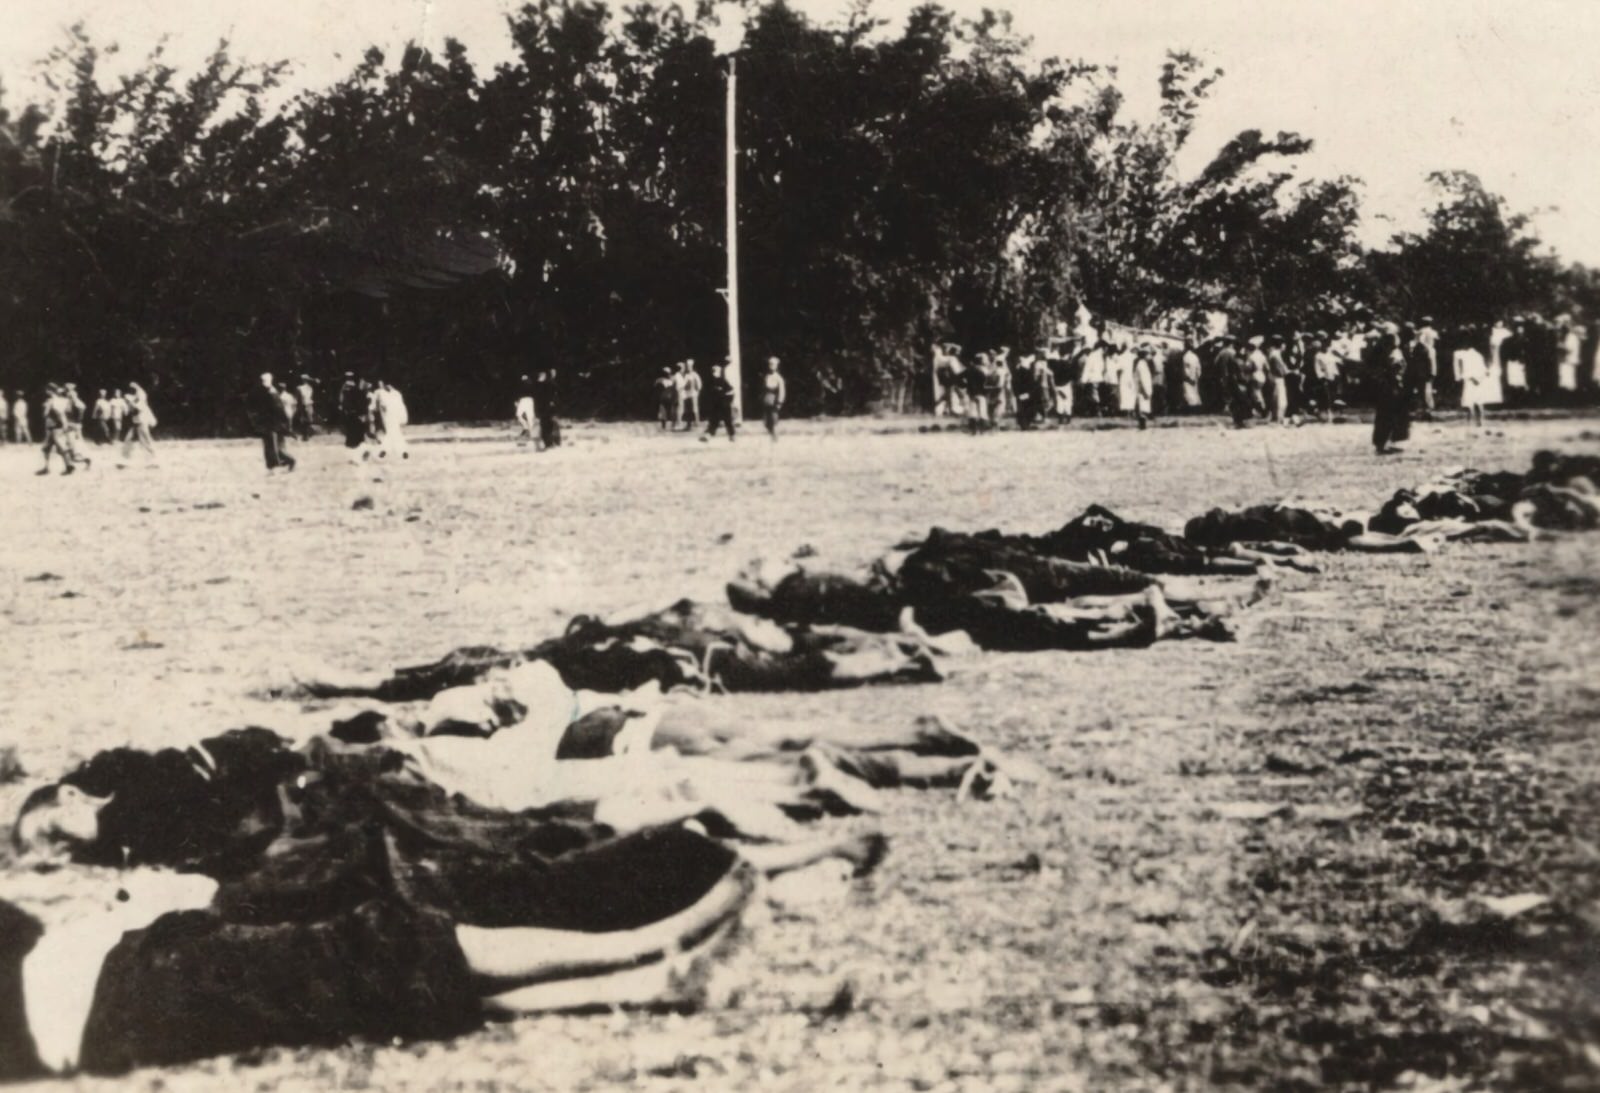 Four thousand workers, peasants, soldiers and students were mowed down in the counter-revolution which followed the Canton Commune, December 11, 1927.